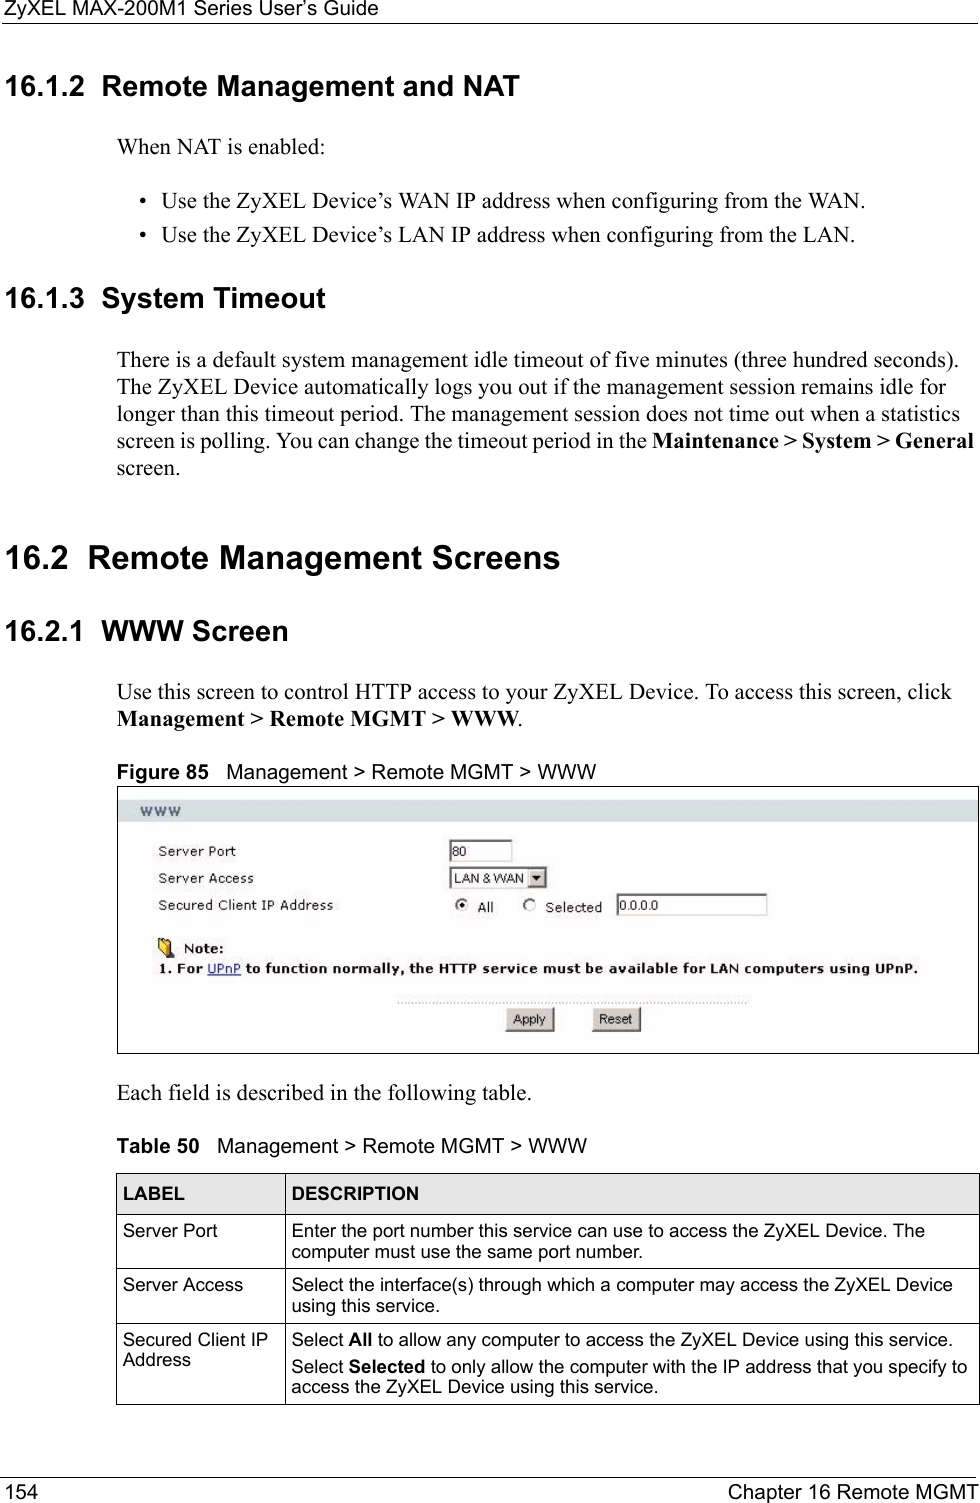 ZyXEL MAX-200M1 Series User’s Guide154 Chapter 16 Remote MGMT16.1.2  Remote Management and NATWhen NAT is enabled:• Use the ZyXEL Device’s WAN IP address when configuring from the WAN. • Use the ZyXEL Device’s LAN IP address when configuring from the LAN.16.1.3  System TimeoutThere is a default system management idle timeout of five minutes (three hundred seconds). The ZyXEL Device automatically logs you out if the management session remains idle for longer than this timeout period. The management session does not time out when a statistics screen is polling. You can change the timeout period in the Maintenance &gt; System &gt; General screen.16.2  Remote Management Screens16.2.1  WWW ScreenUse this screen to control HTTP access to your ZyXEL Device. To access this screen, click Management &gt; Remote MGMT &gt; WWW.Figure 85   Management &gt; Remote MGMT &gt; WWWEach field is described in the following table.Table 50   Management &gt; Remote MGMT &gt; WWWLABEL DESCRIPTIONServer Port Enter the port number this service can use to access the ZyXEL Device. The computer must use the same port number.Server Access Select the interface(s) through which a computer may access the ZyXEL Device using this service.Secured Client IP AddressSelect All to allow any computer to access the ZyXEL Device using this service.Select Selected to only allow the computer with the IP address that you specify to access the ZyXEL Device using this service.